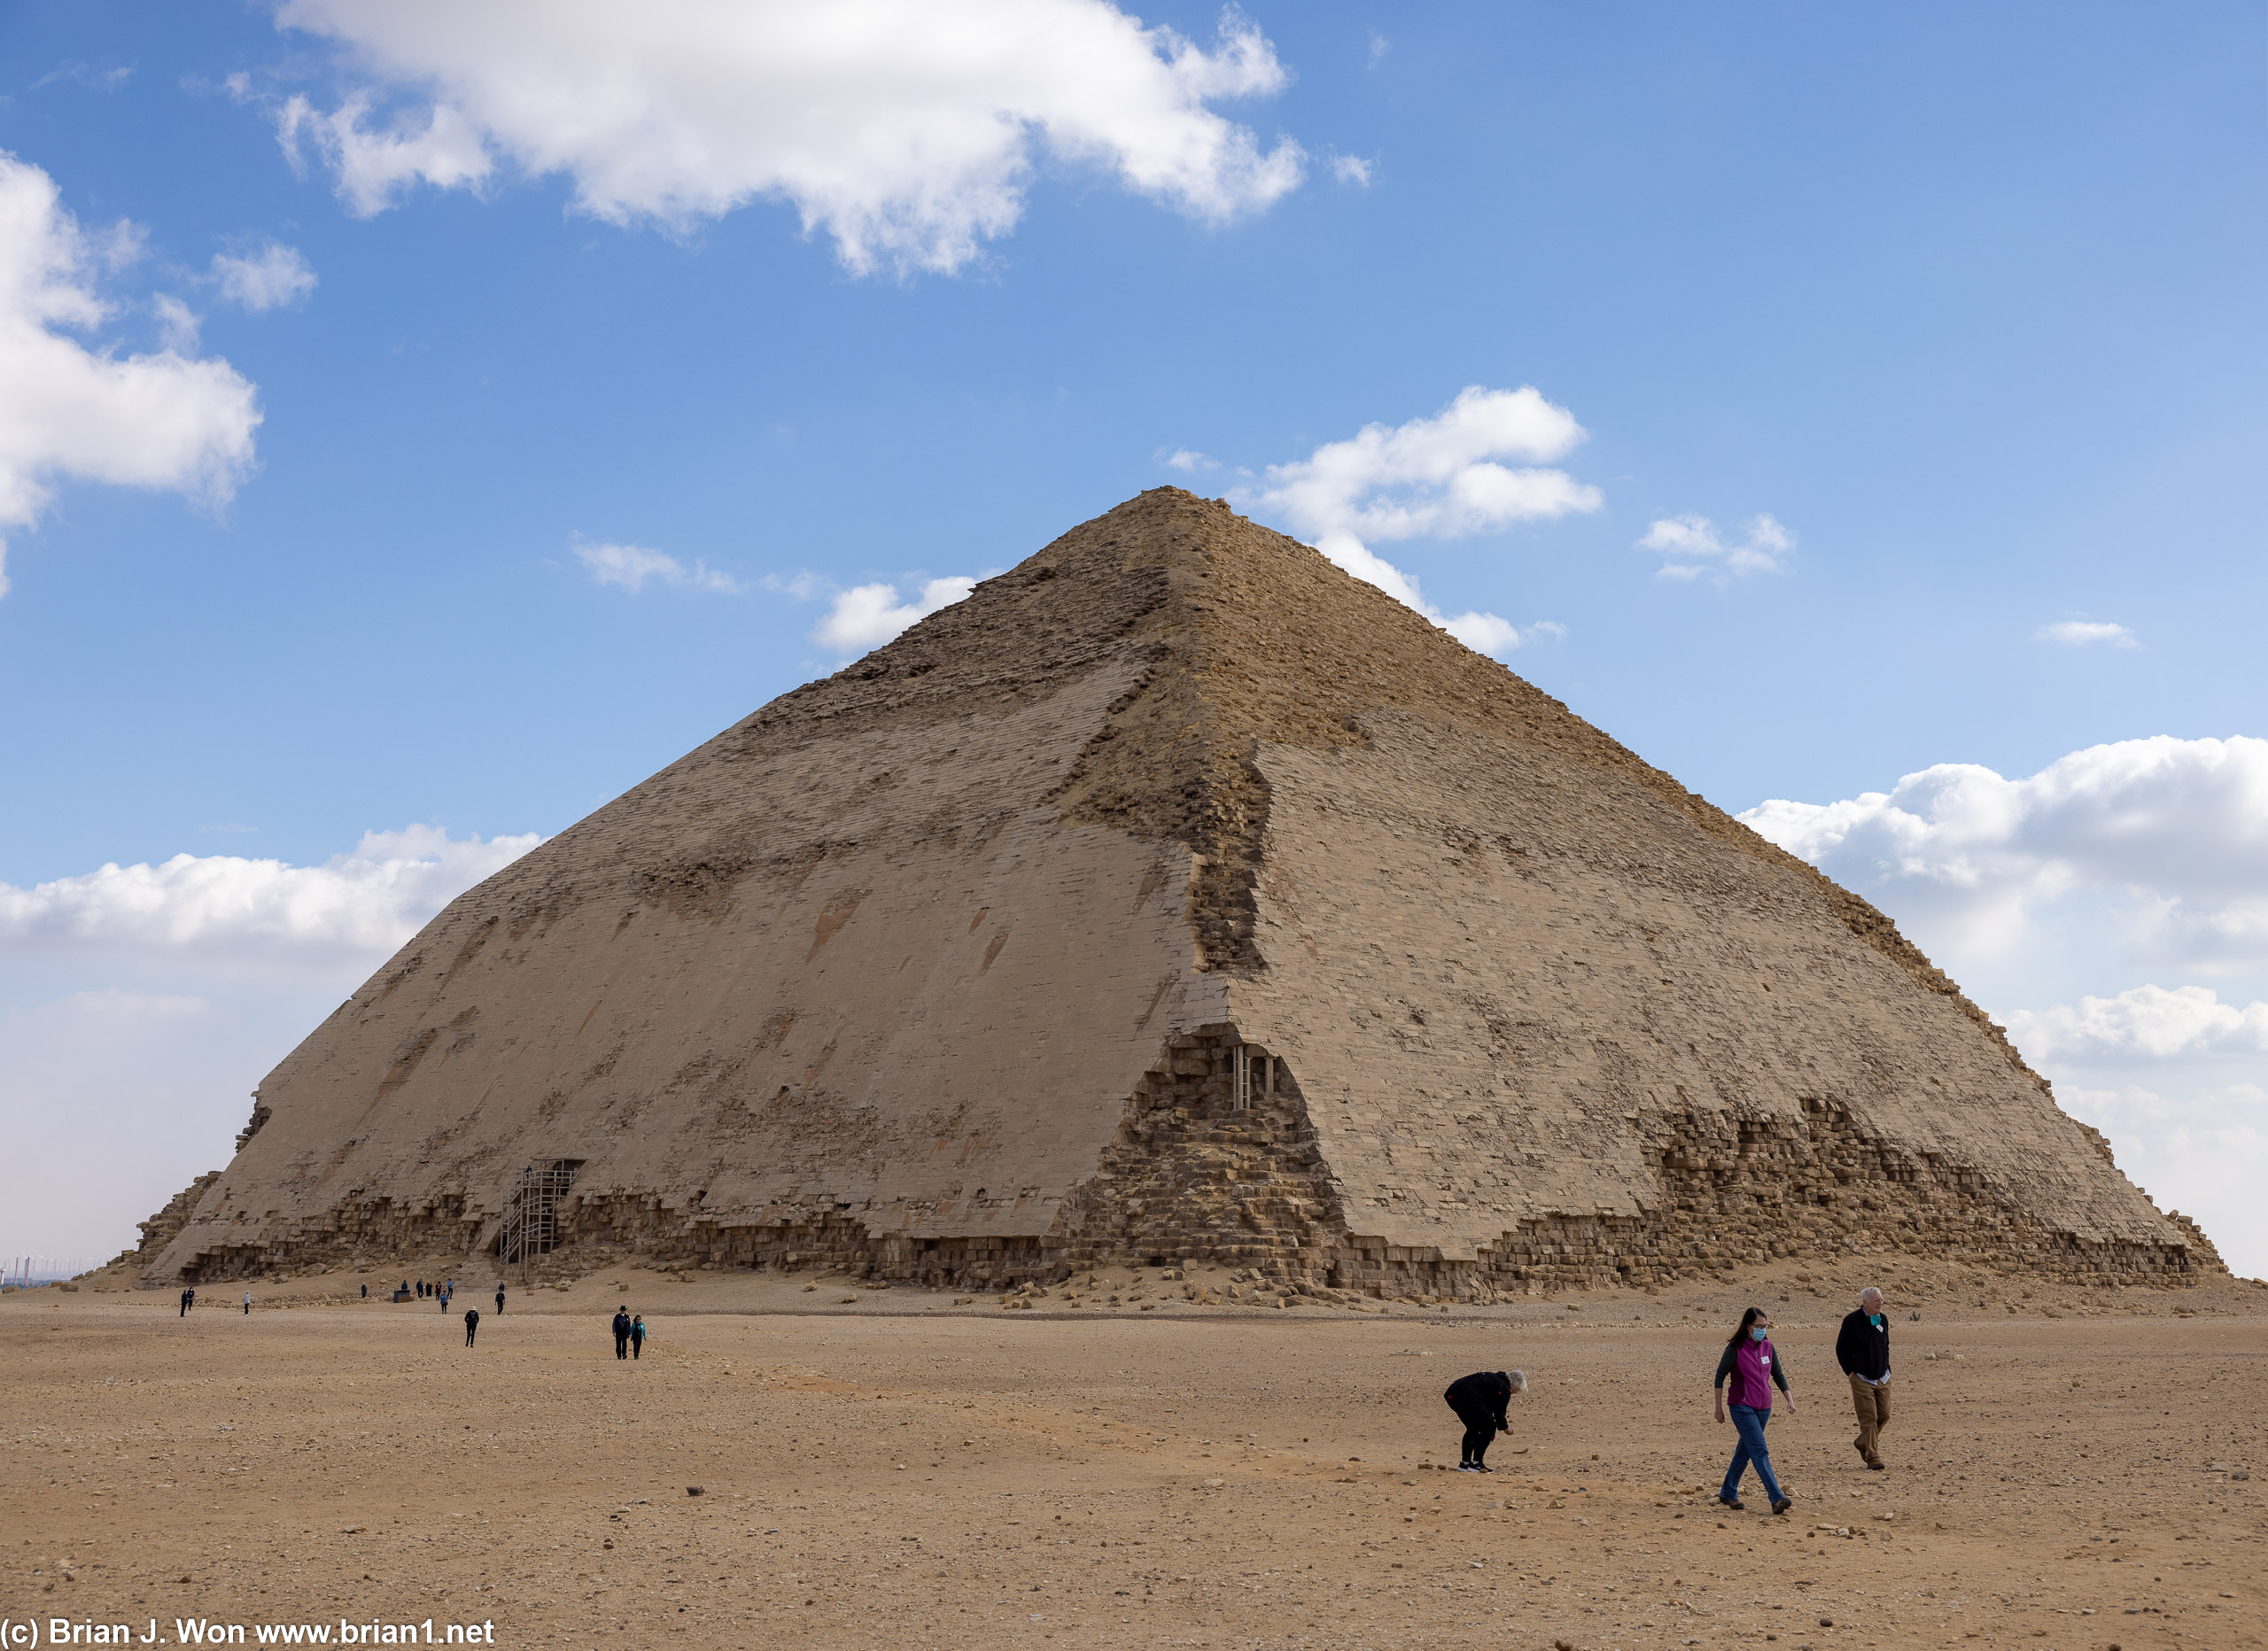 The Bent Pyramid, also built by the pharoah Sneferu.